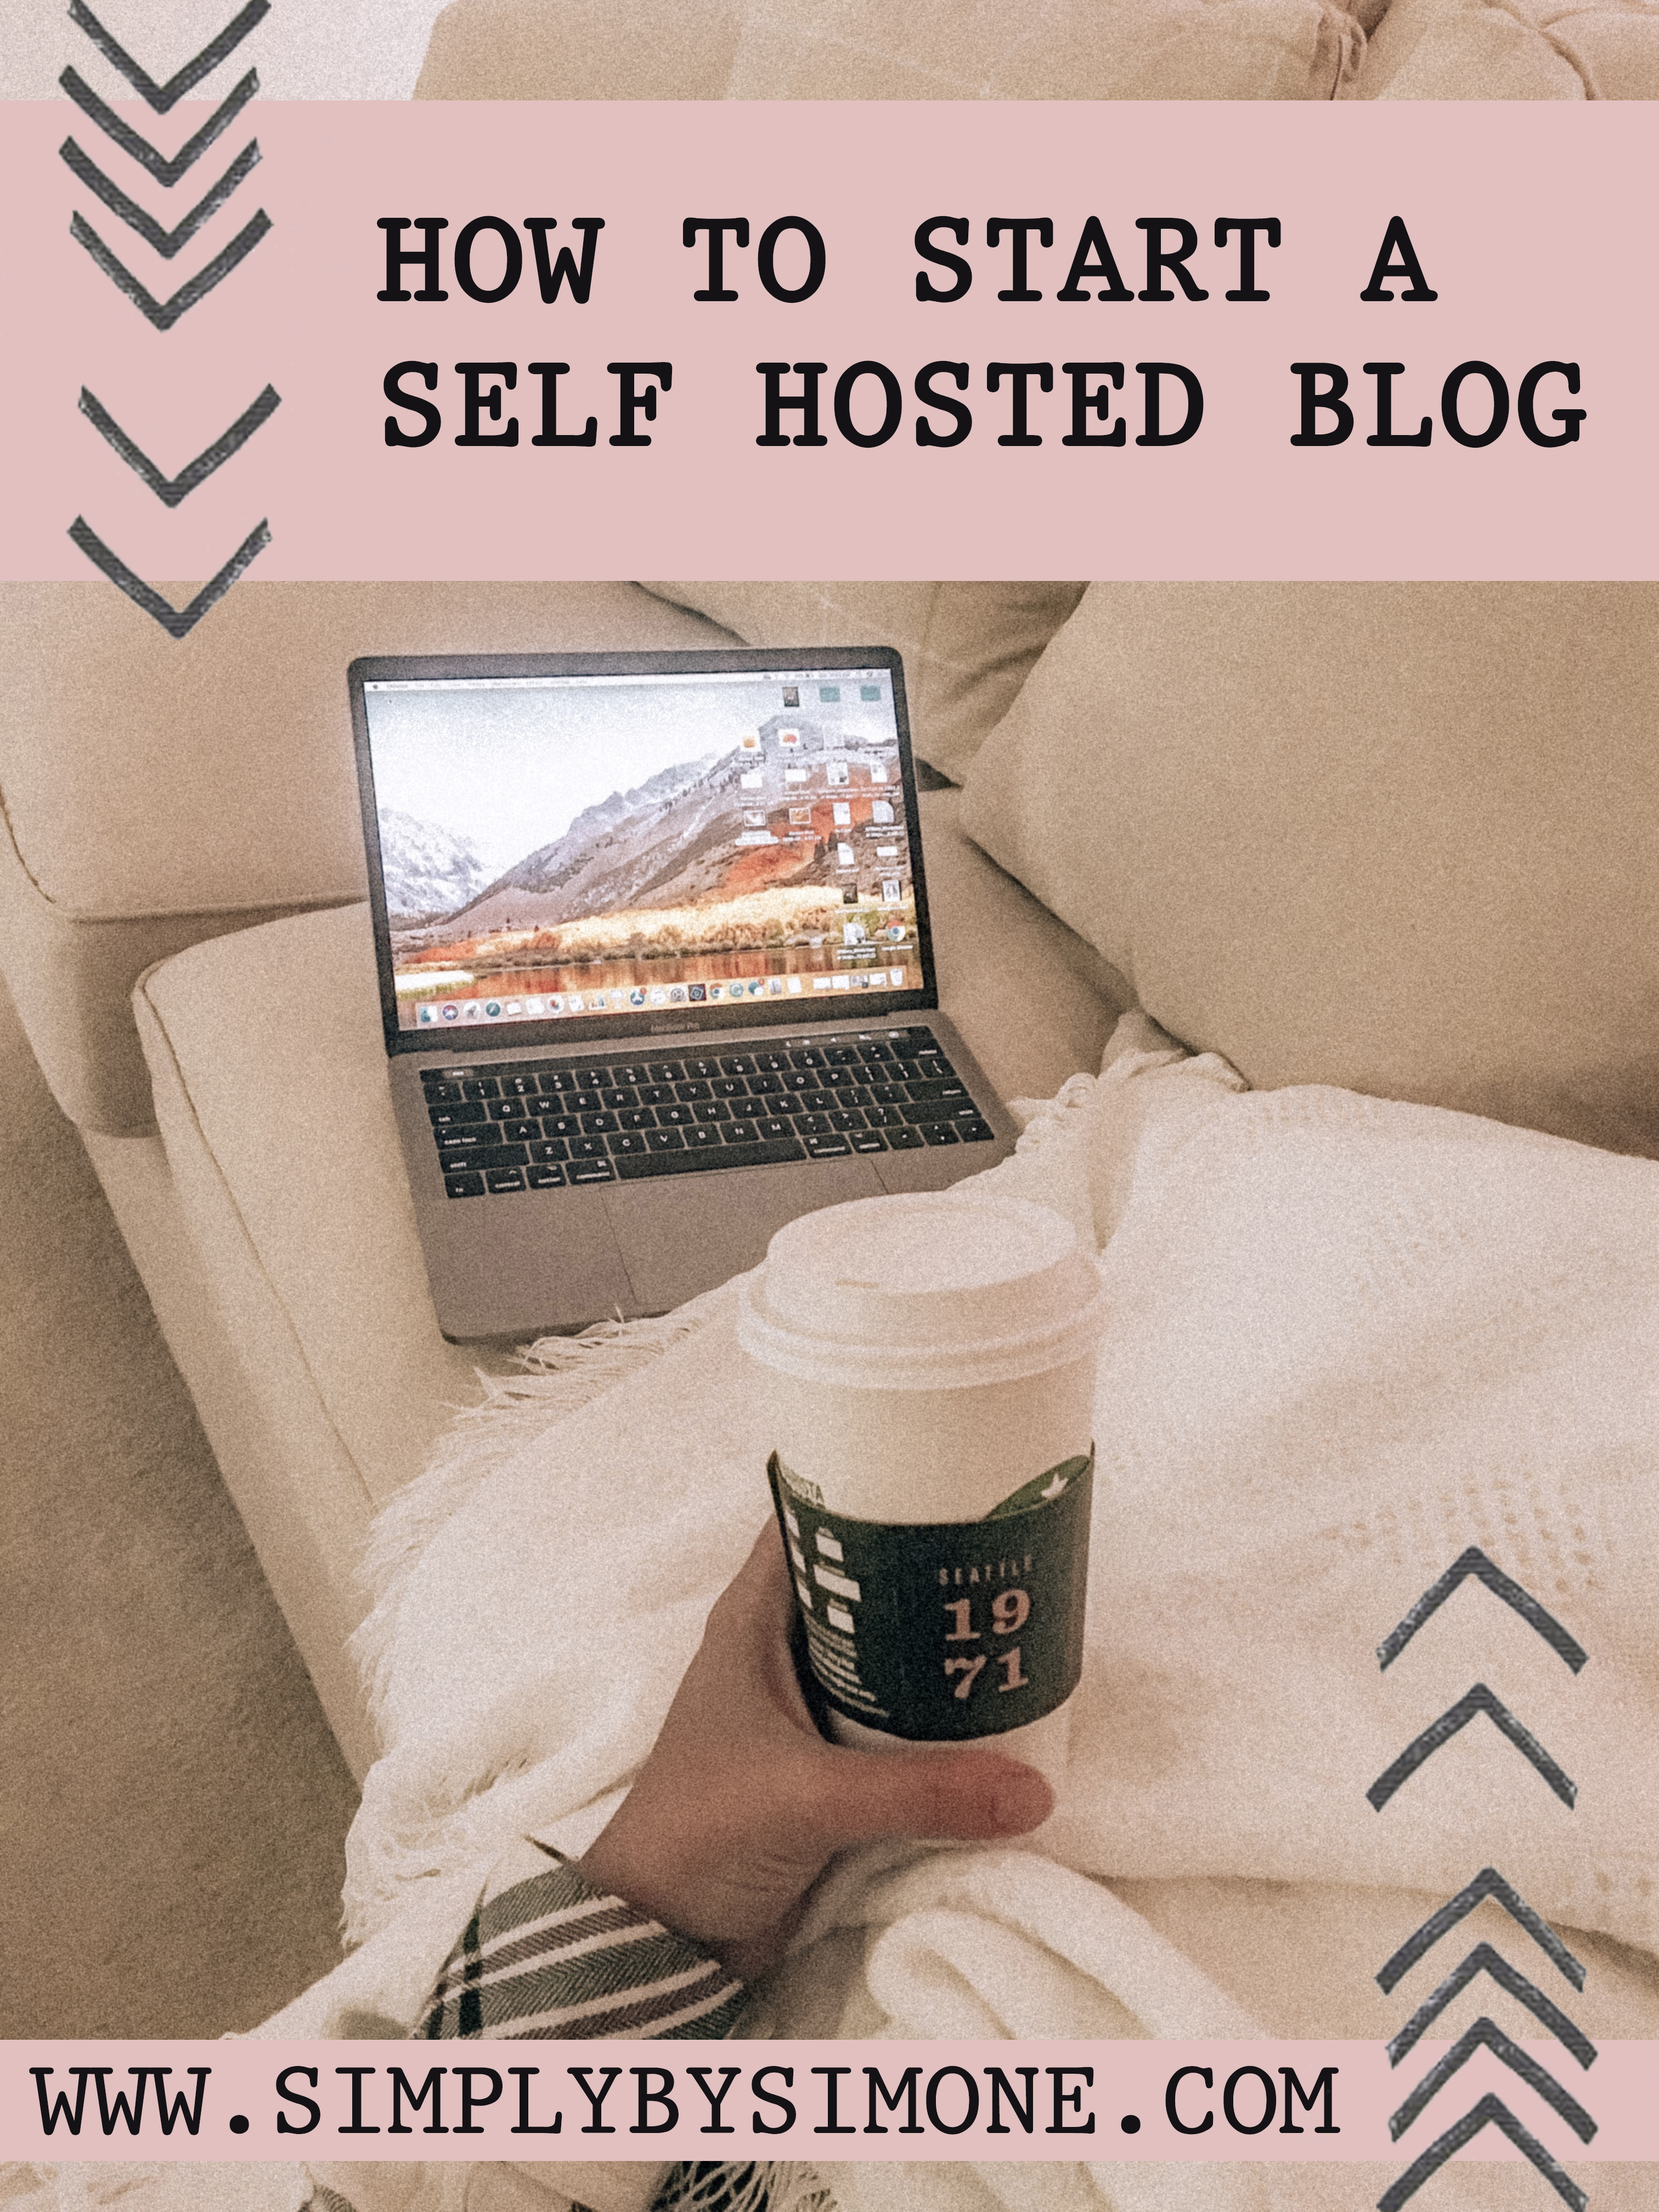 Blogging Tips How YOU Can Start Your Blog Today-Bluehost-Self host-Blogger-Simply by Simone-Wordpress-Fashion Blogger-Website-Tips #bloggingtips #blogger #howto